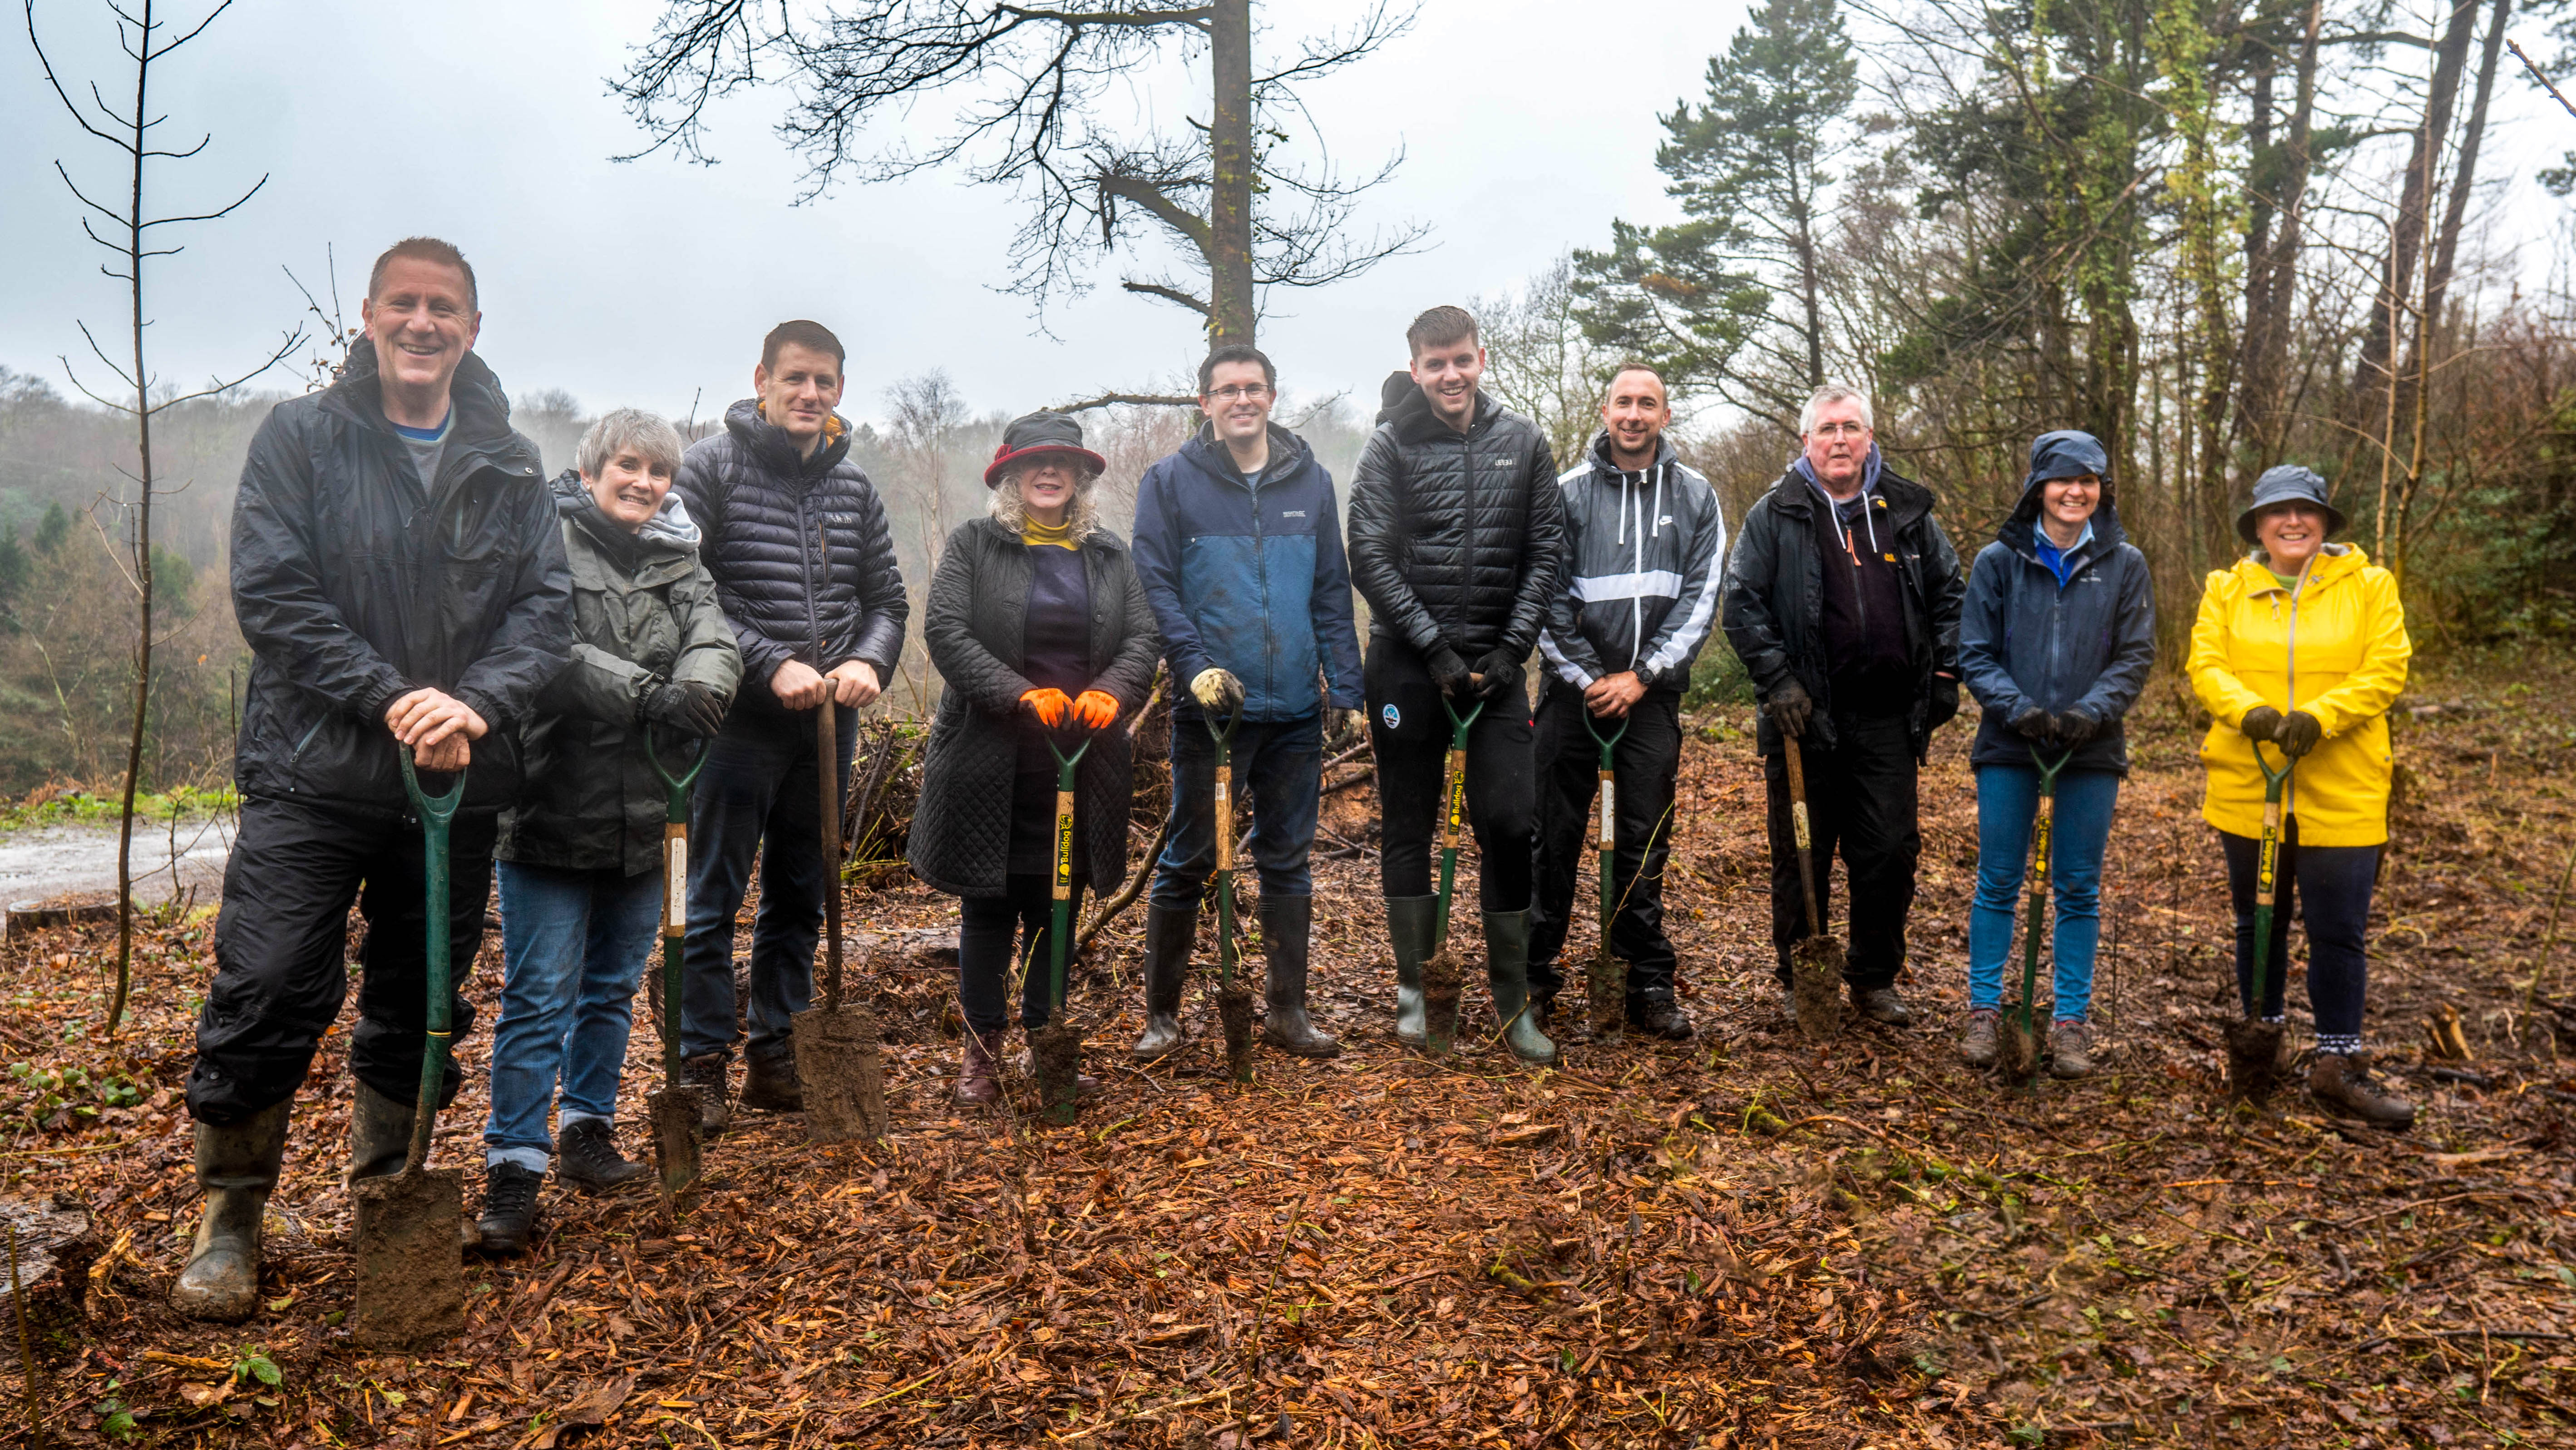 Proud to plant 100 trees to mark our centenary